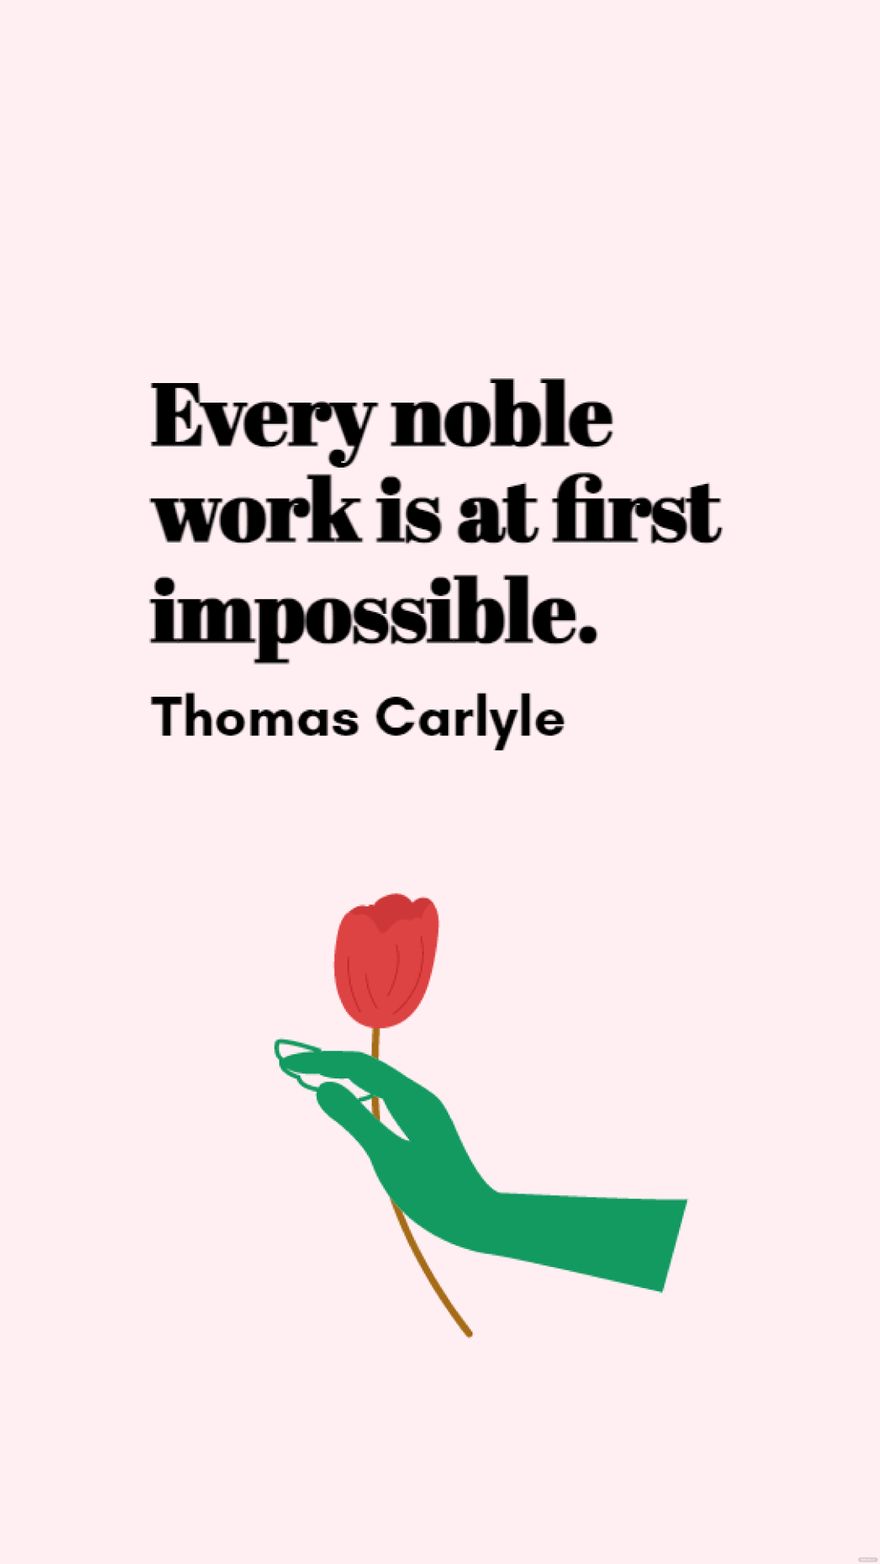 Thomas Carlyle - Every noble work is at first impossible.